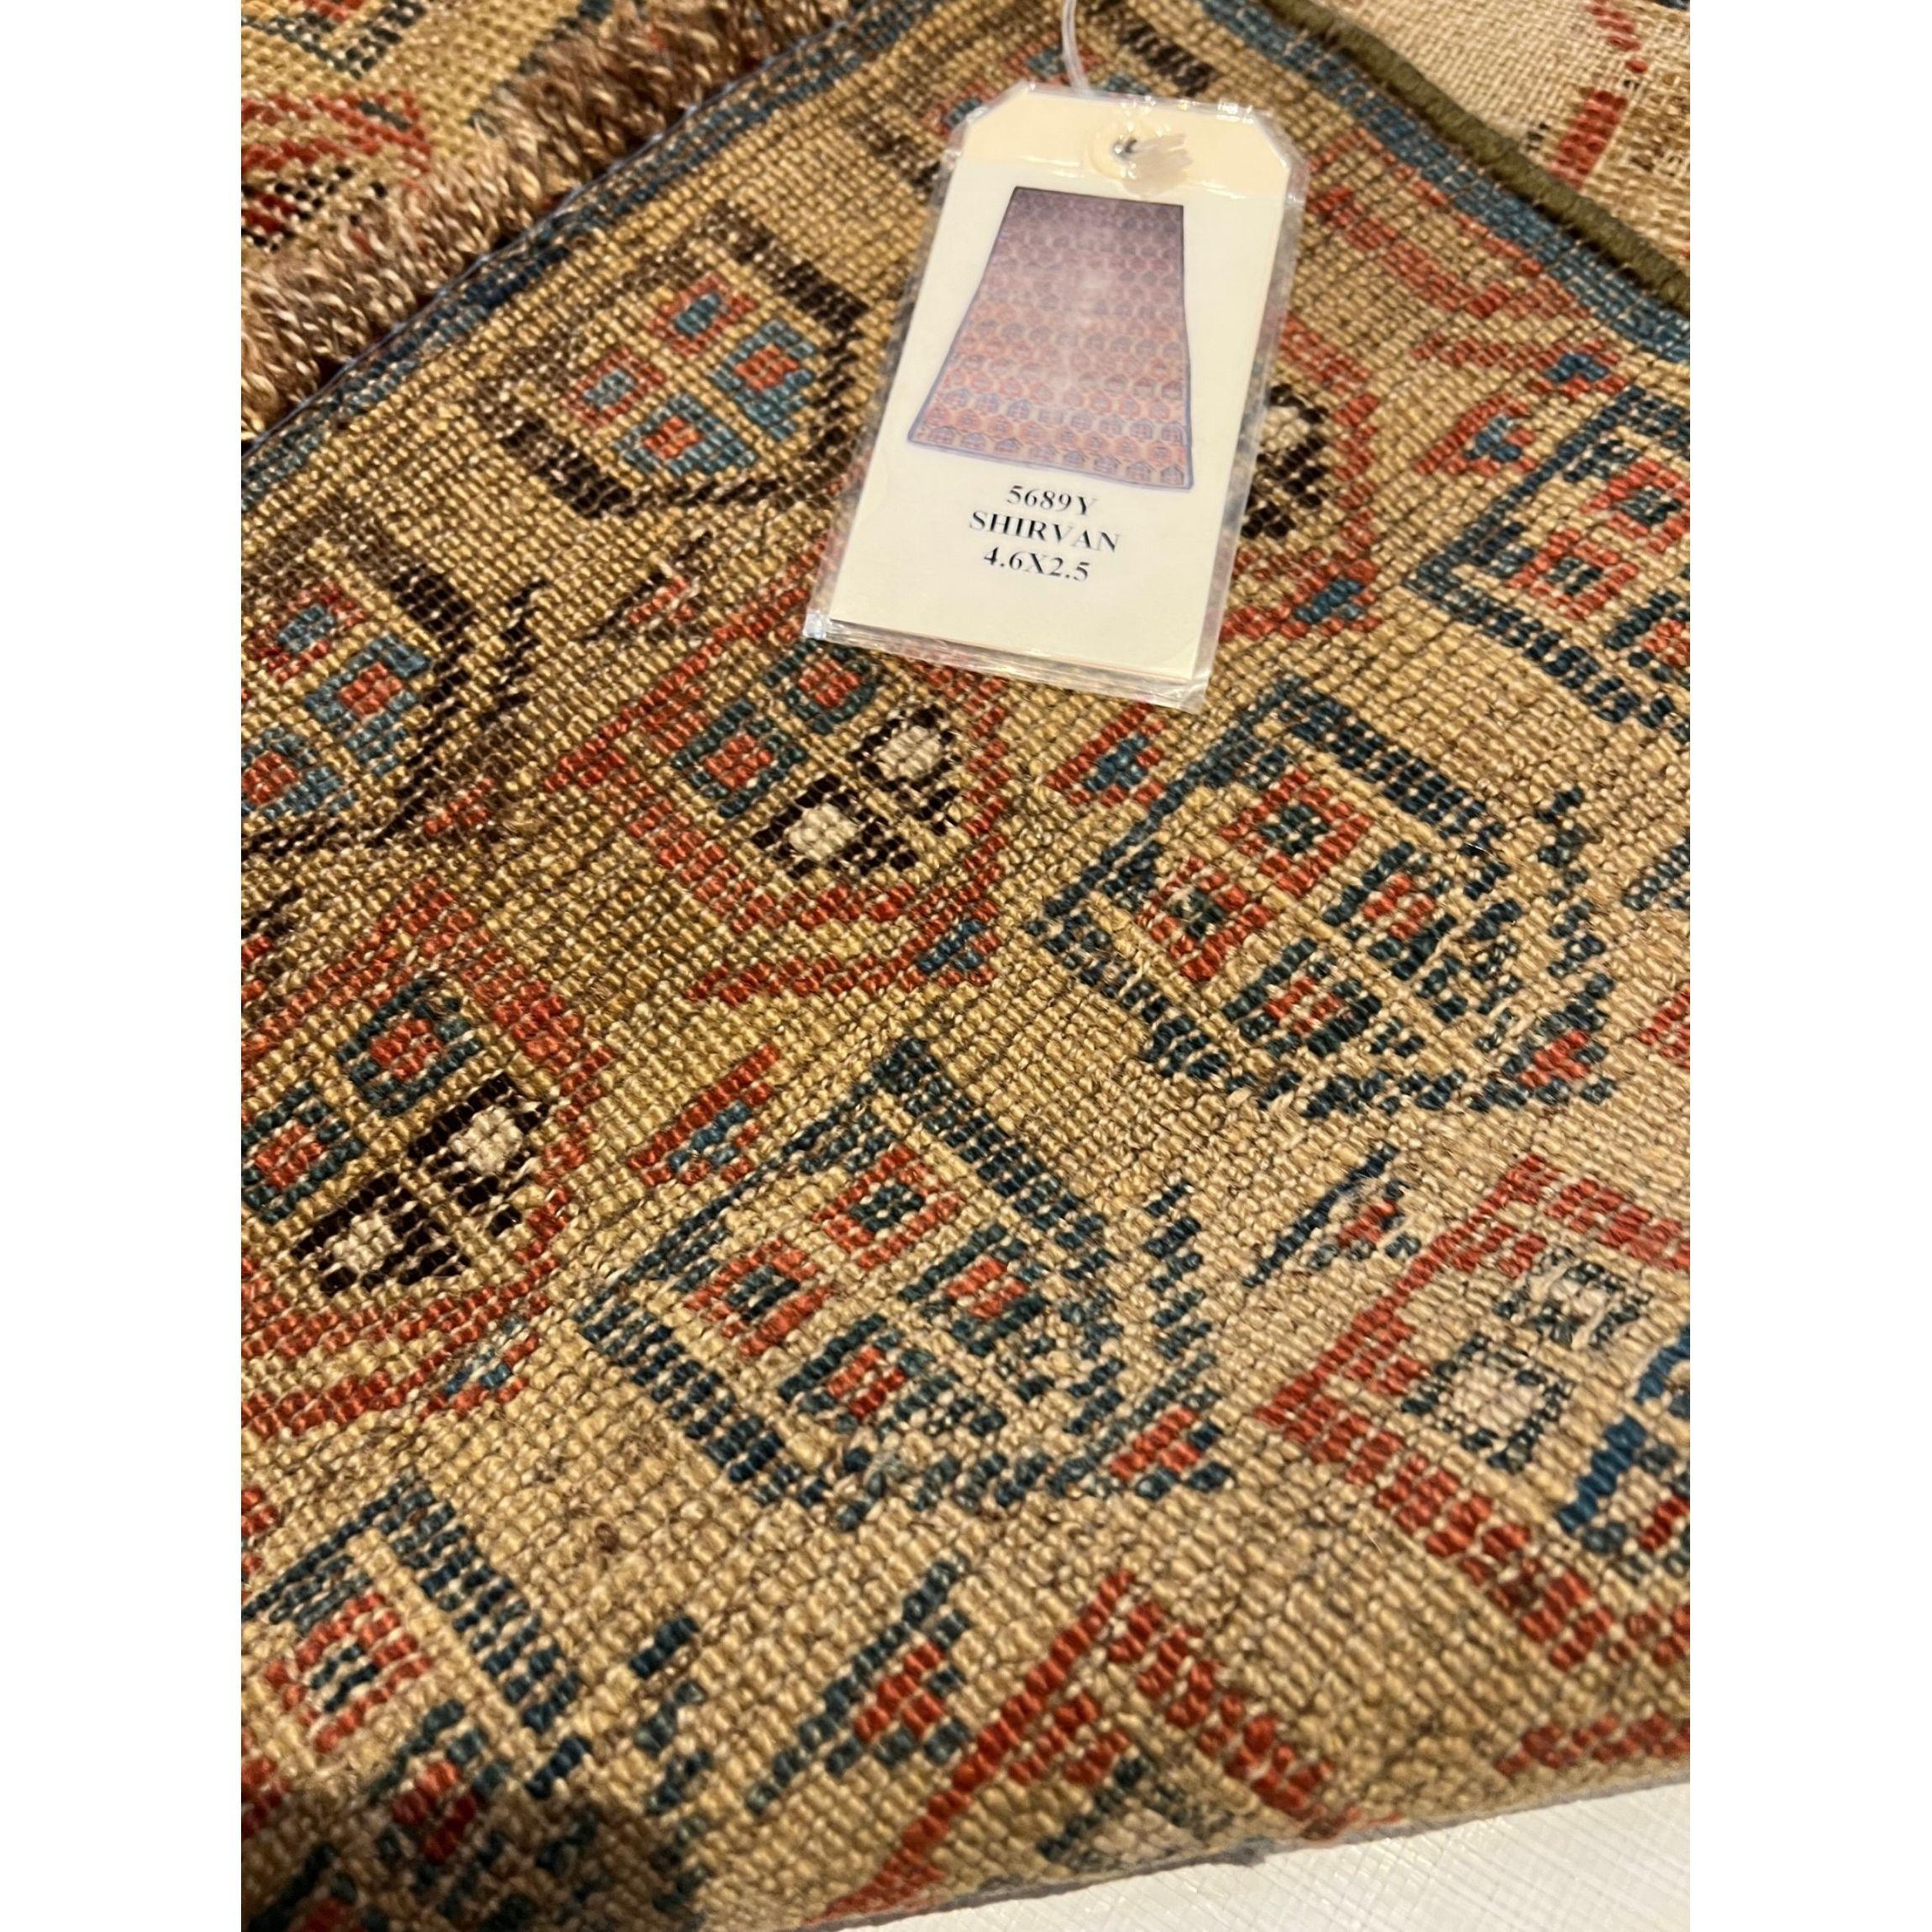 Shirvan rugs – The historic Khanate or administrative district of Shirvan produced many highly decorative antique rugs that have a formality and stylistic complexity that is found in few rugs from the Caucasus. The depth of colors, the complexity of